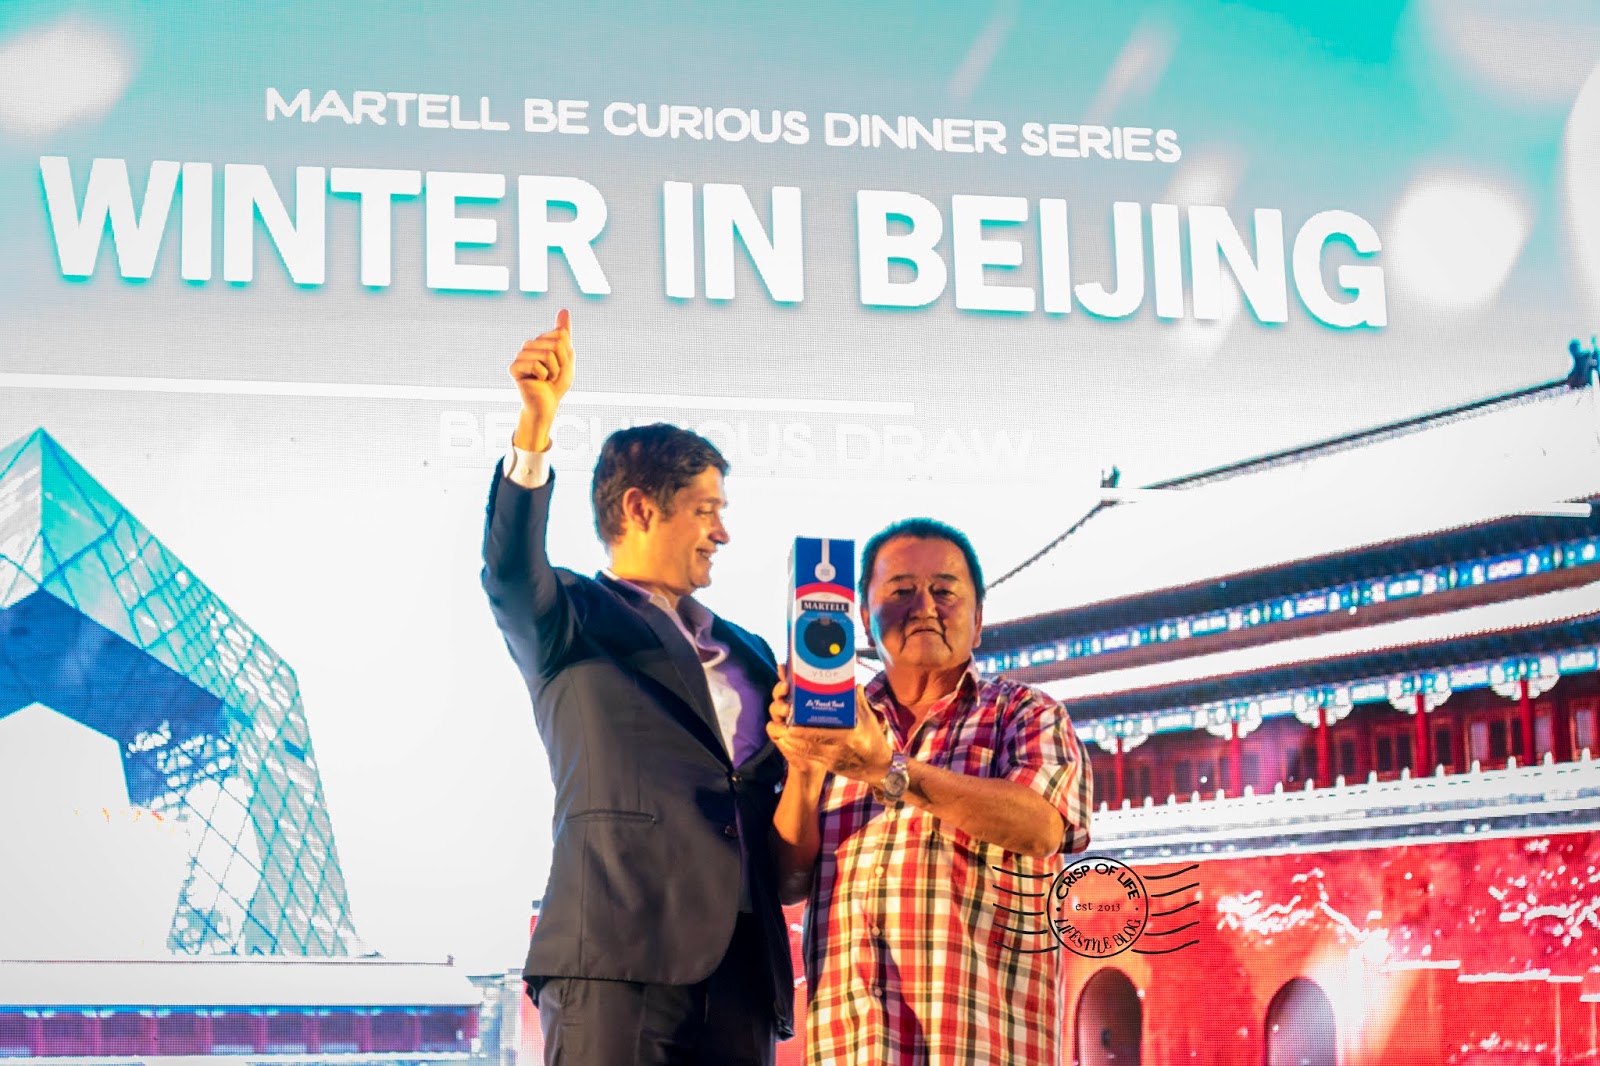 Be Curious Dinner Series "Winter in Beijing by The House of Martell and Chivas Regal 